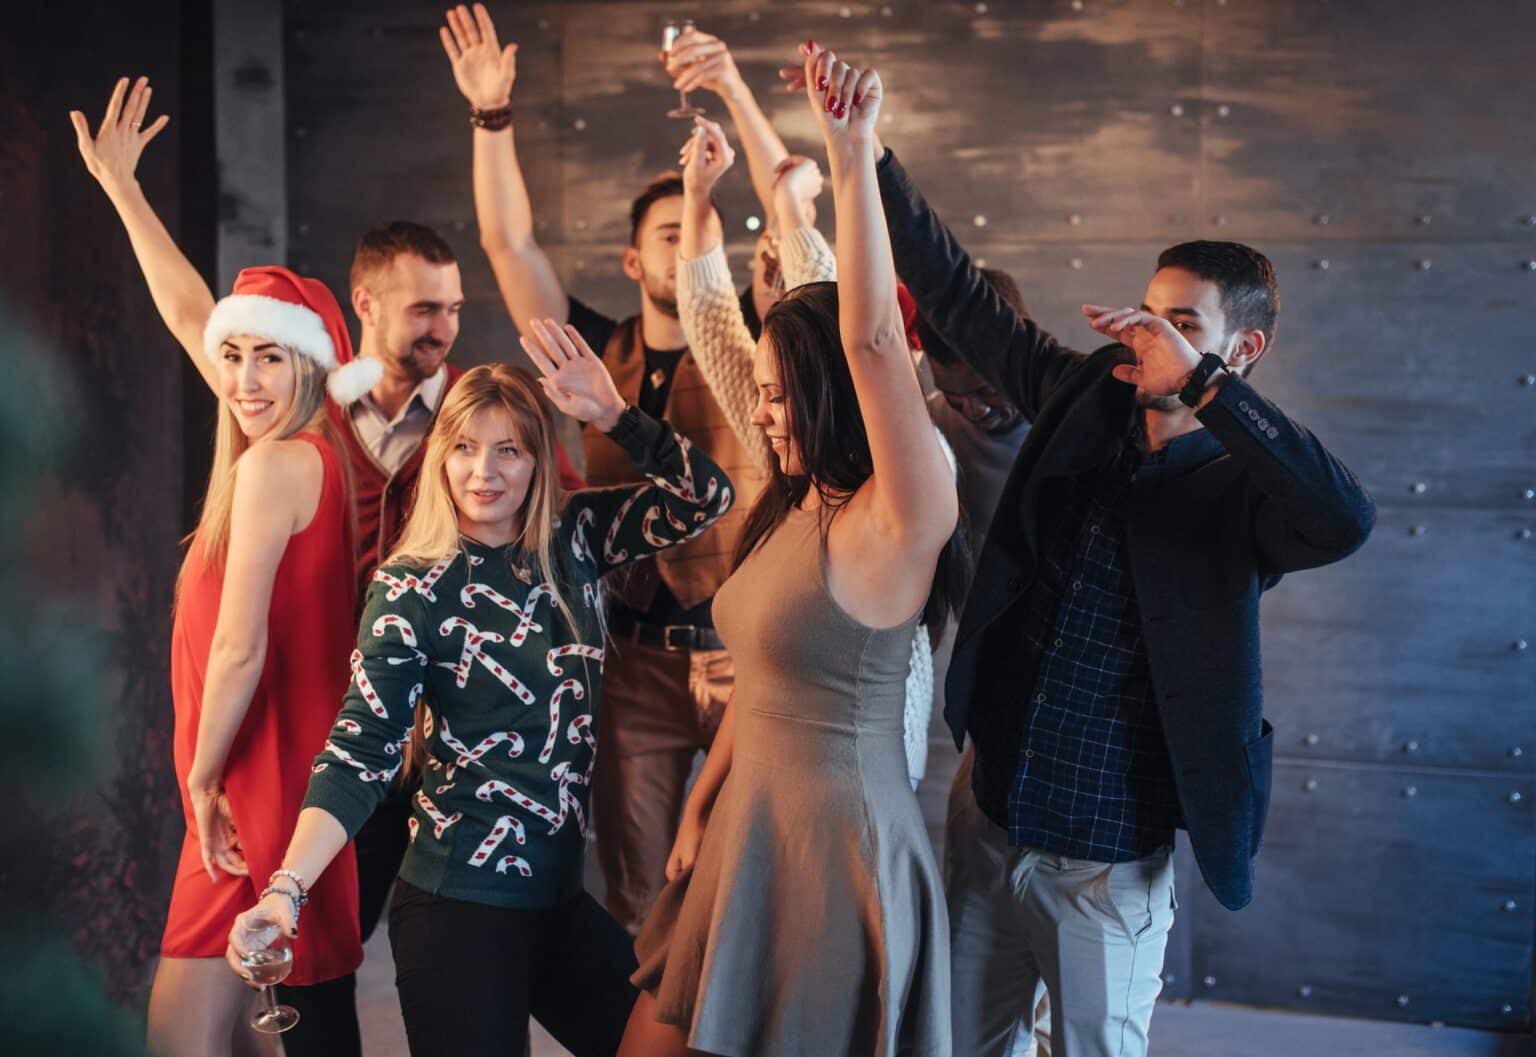 Group of people dancing at Christmas party with event DJ services provided by Good Company Entertainment Group in Edmonton